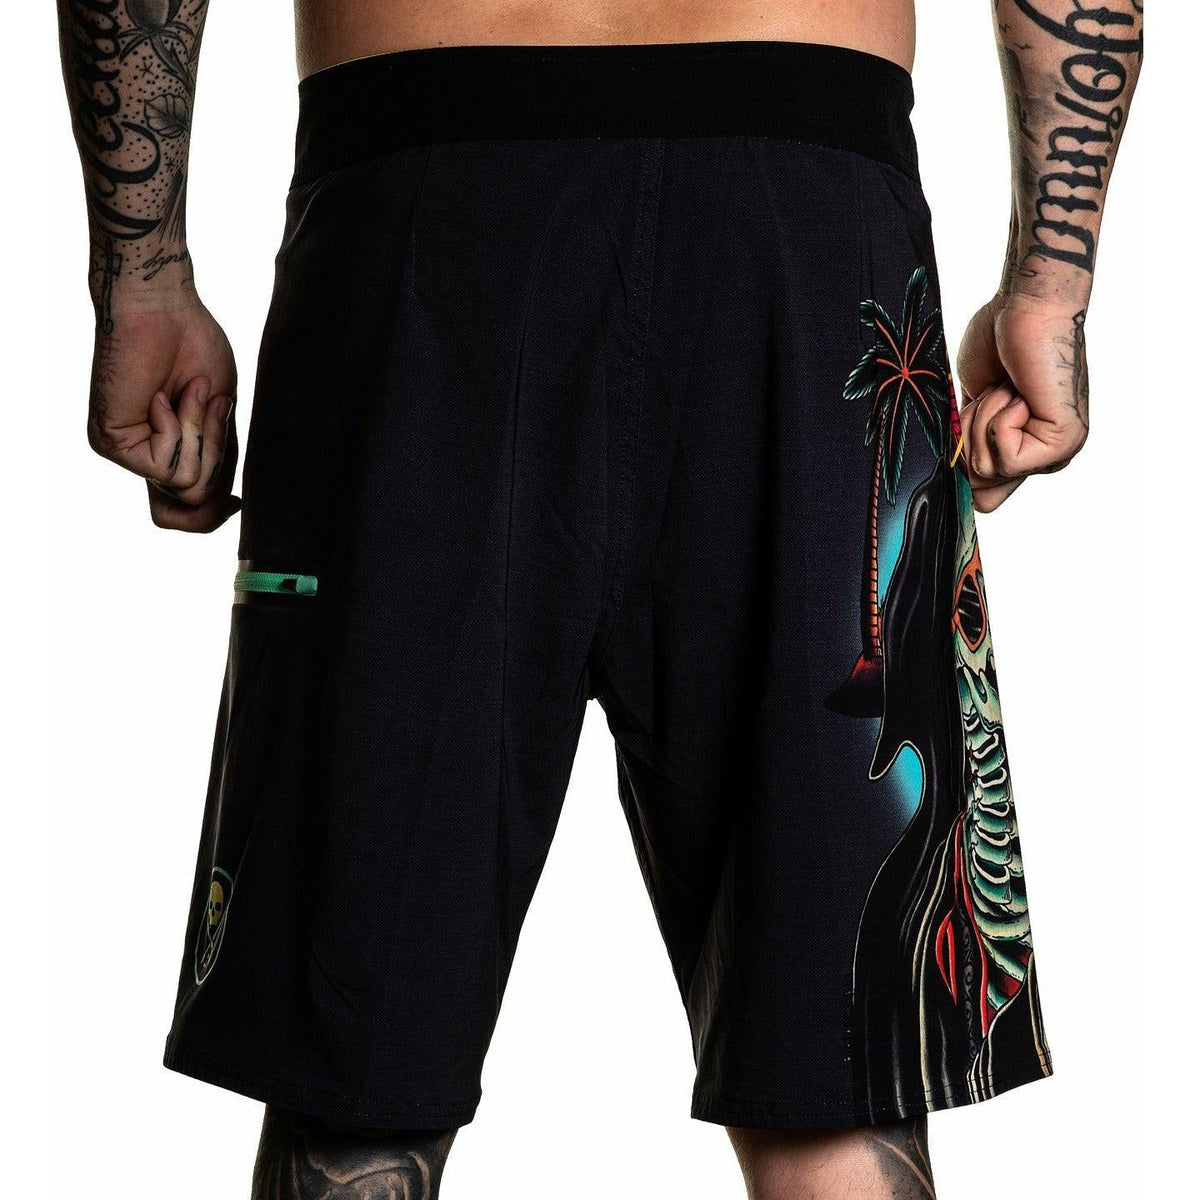 SULLEN-ART-COLLECTIVE-CLOTHING-REAP-O-COLADA-BOARDSHORTS - SHORT - Synik Clothing - synikclothing.com